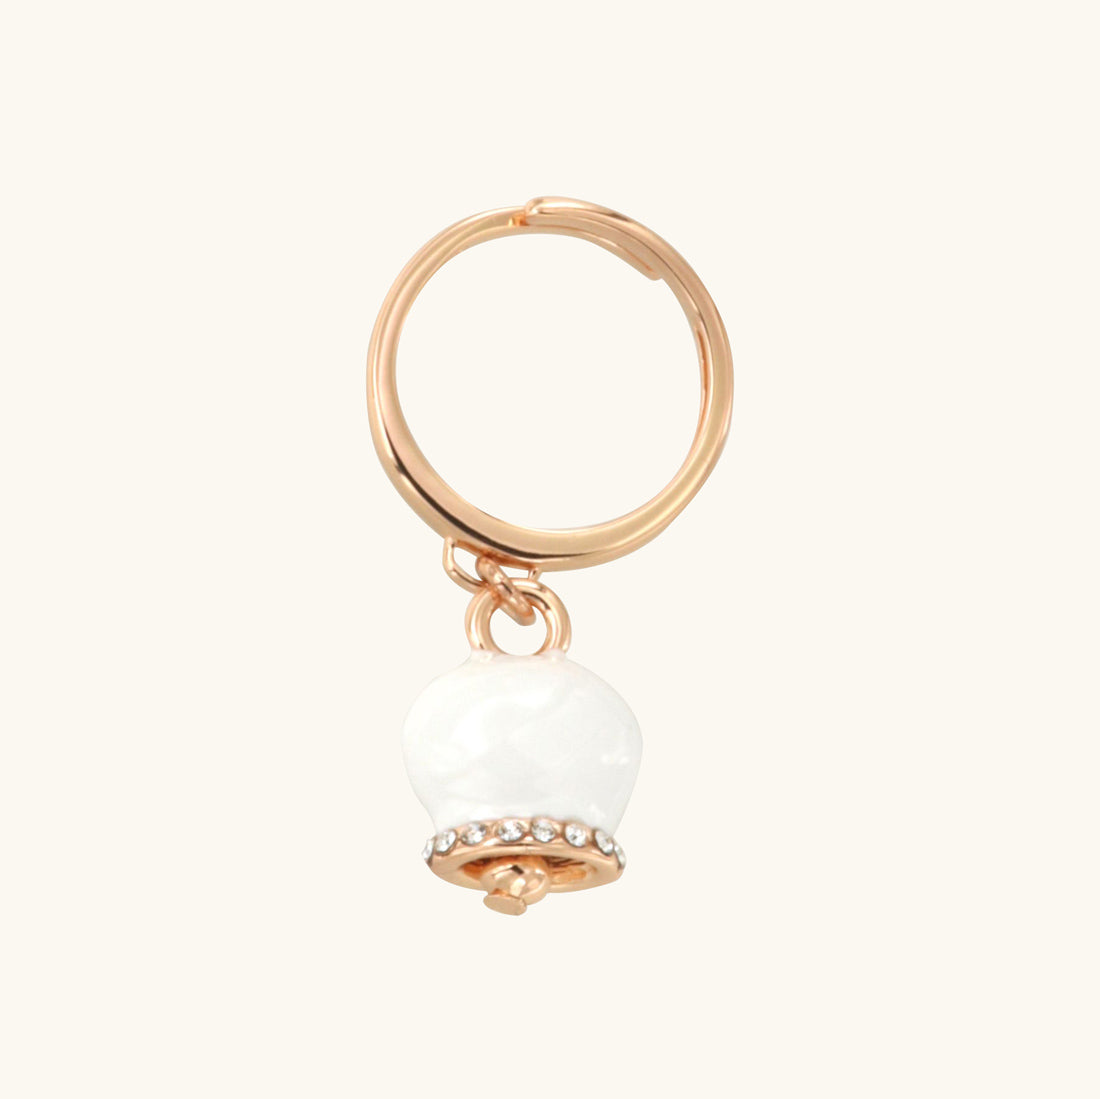 Metal ring with charming bell, embellished with white enamel and crystals